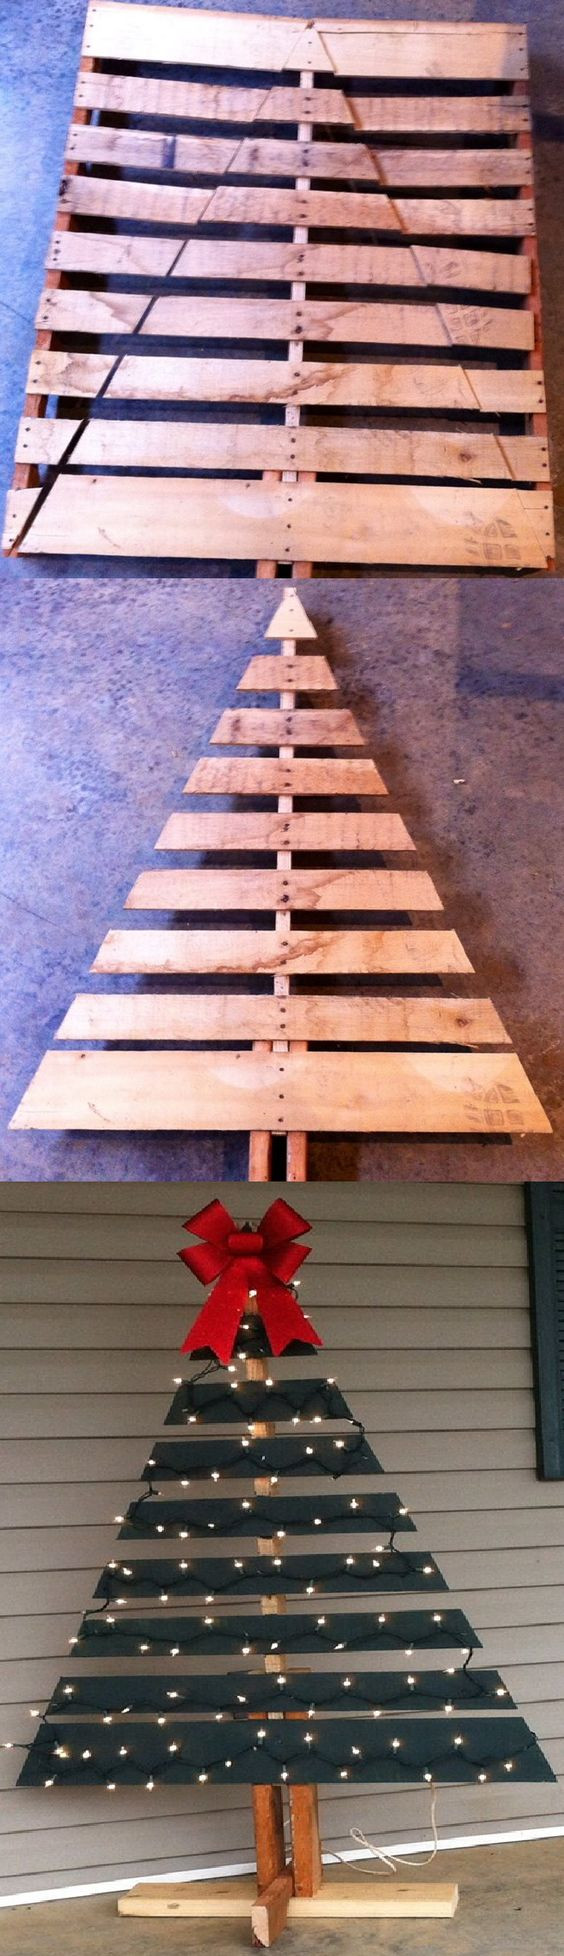 DIY Pallet Christmas Trees
 20 Most Beautiful Outdoor Decoration Ideas for Christmas